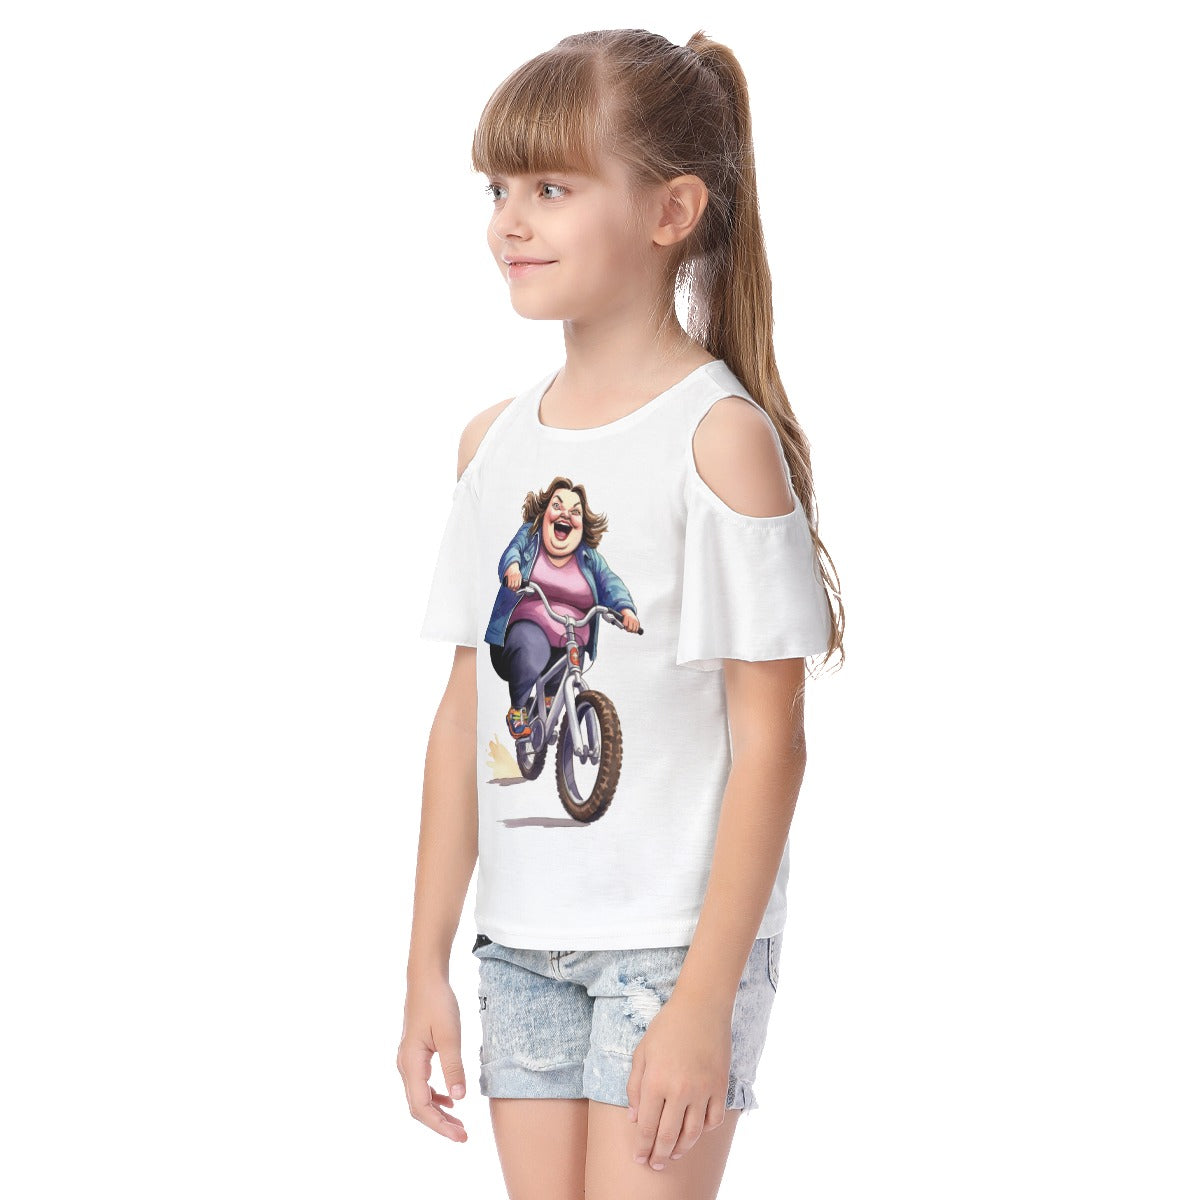 All-Over Print Kid's Cold Shoulder T-shirt With Ruffle Sleeves